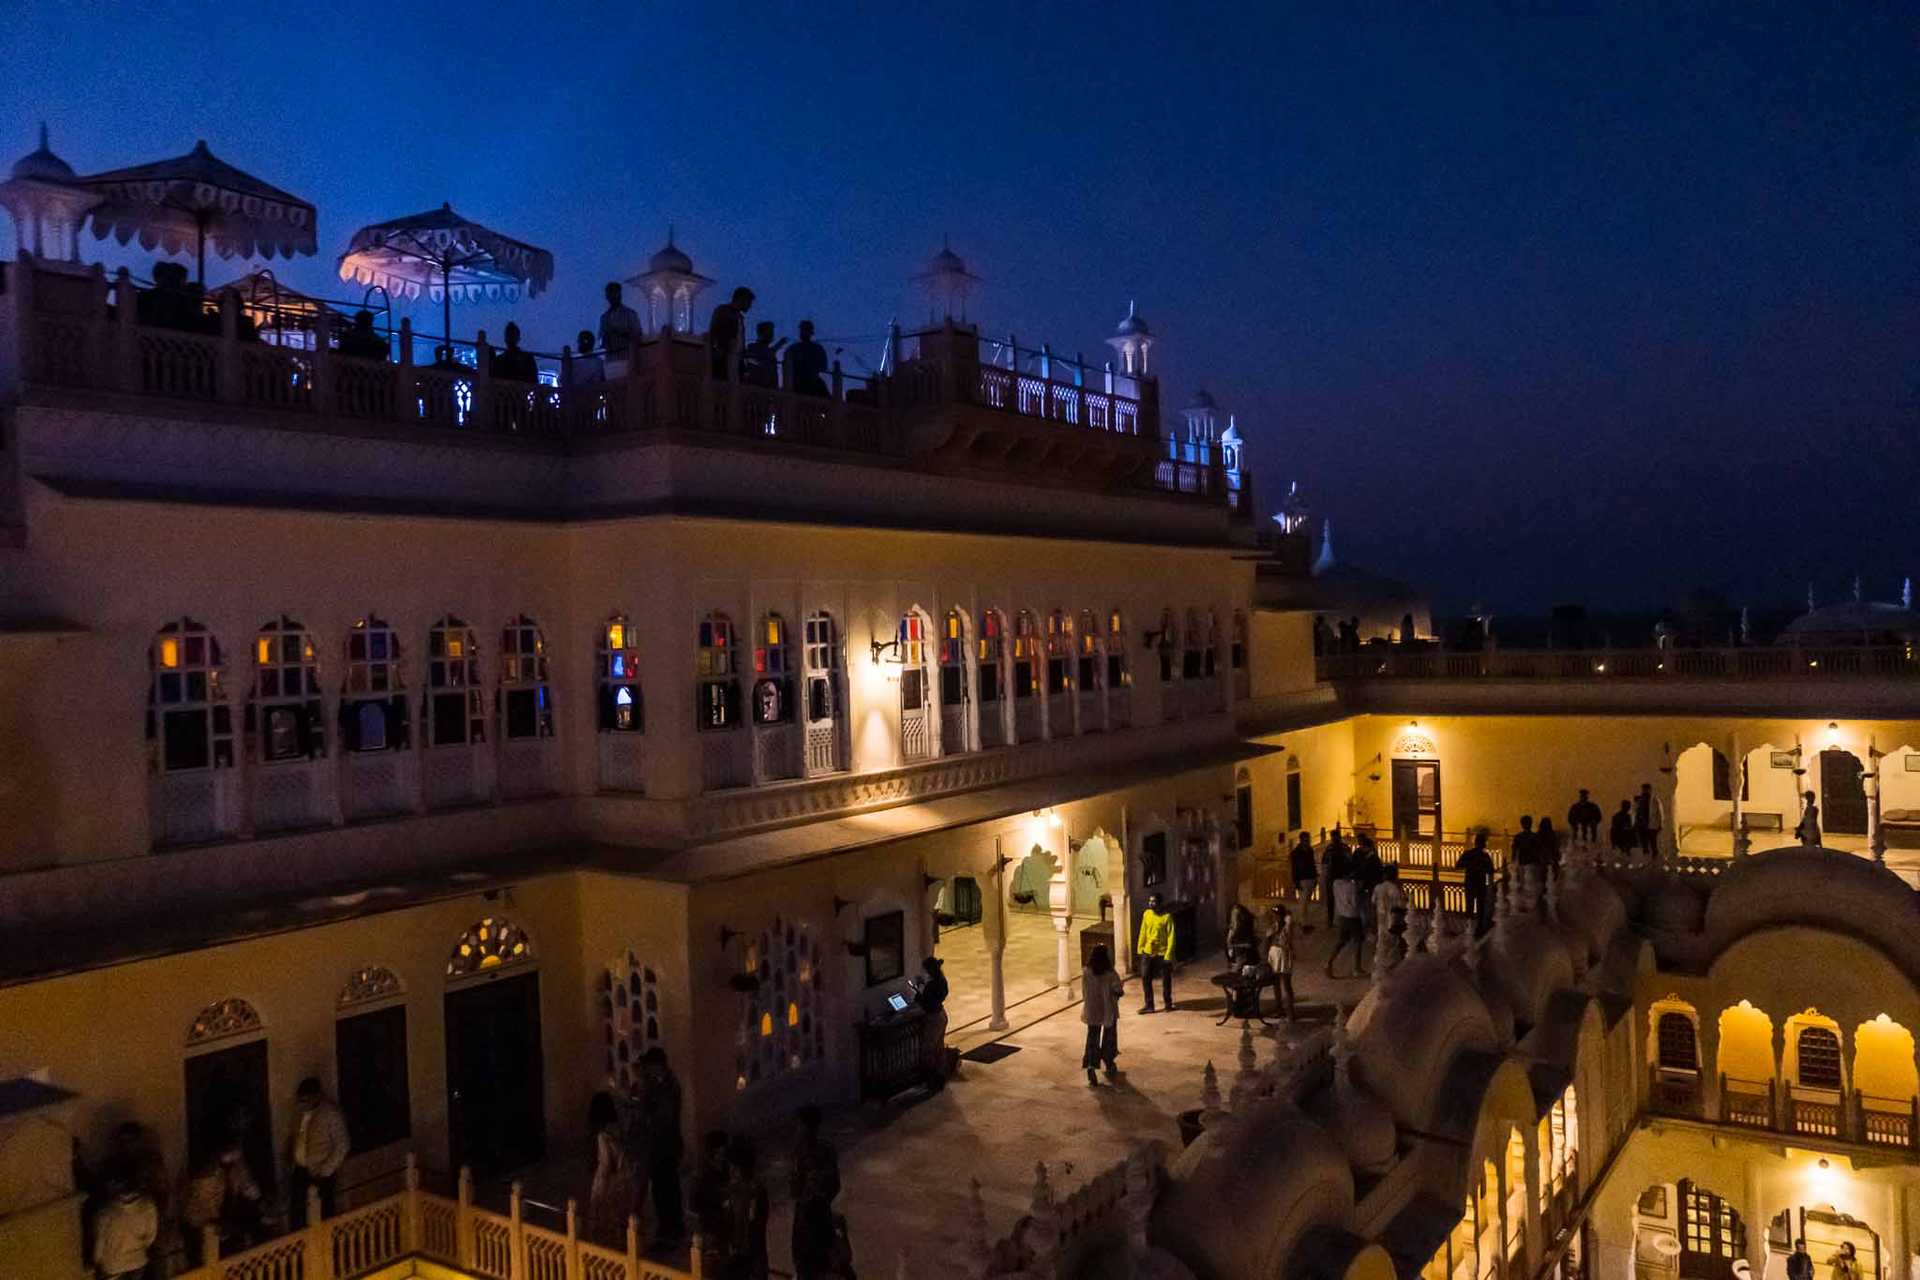 Alsisar Mahal at night during the festival weekend - Image - Aarohi Mehra